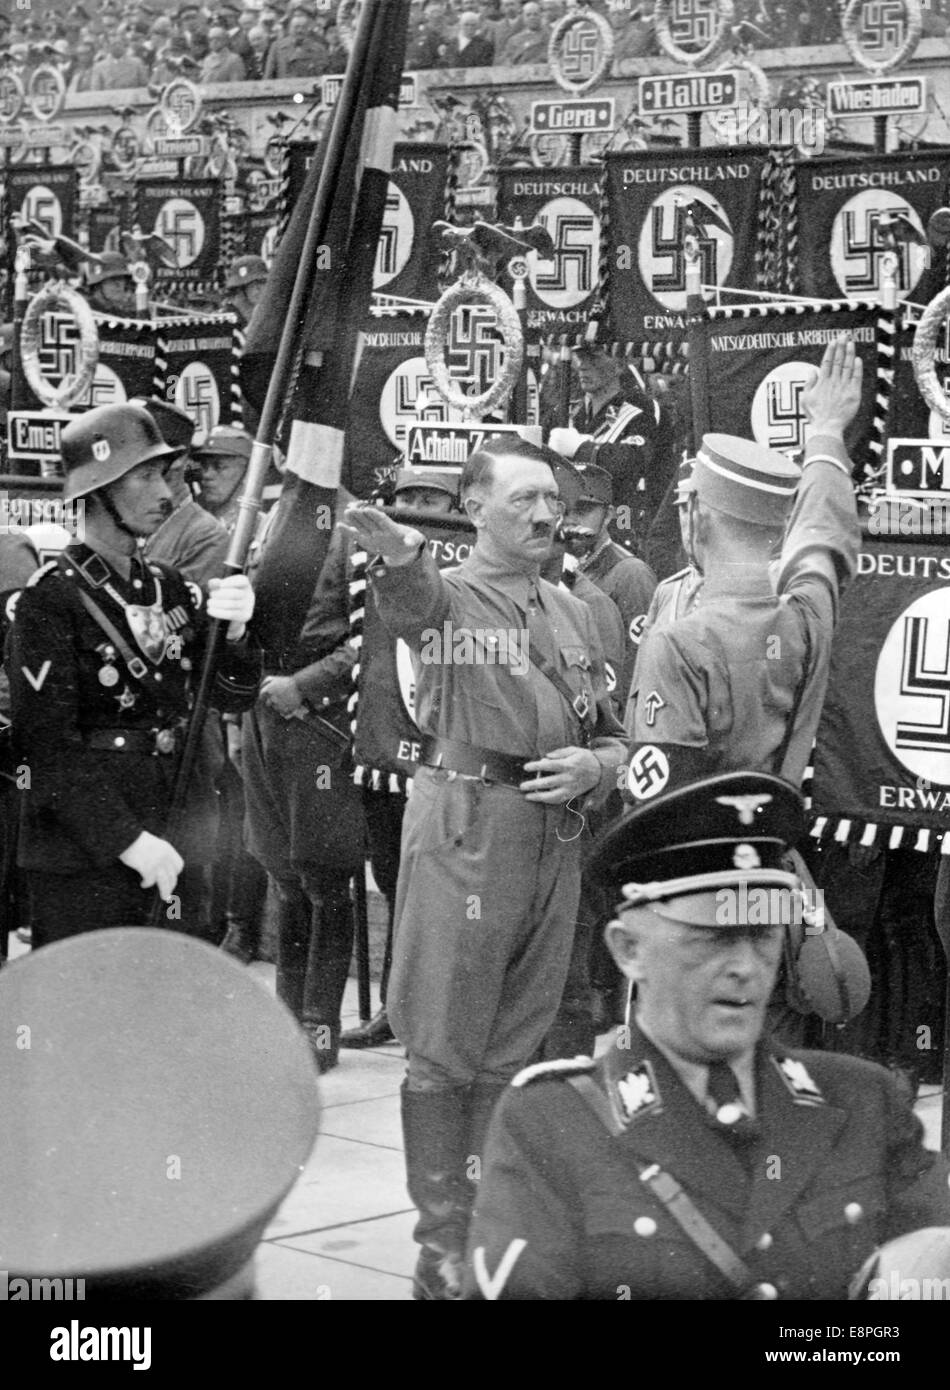 Nuremberg Rally 1937 in Nuremberg, Germany - The new standards are consecrated with the 'Blood Flag' by Adolf Hitler during the great roll call of the Sturmtruppe (SA), Schutzstaffel (SS), National Socialist Motor Corps (NSKK) and National Socialist Flyers Corps (NSFK) at Puitpoldarena at the Nazi party rally grounds. The 'Blood Flag' bearer Jakob Grimminger stands behind Hitler. New standards of SA and SS were 'consecrated' by touching them to the 'Blood Flag', which supposedly was carried in the failed Beer Hall Putsch. (Flaws in quality due to the historic picture copy) Photo: Berliner Ver Stock Photo